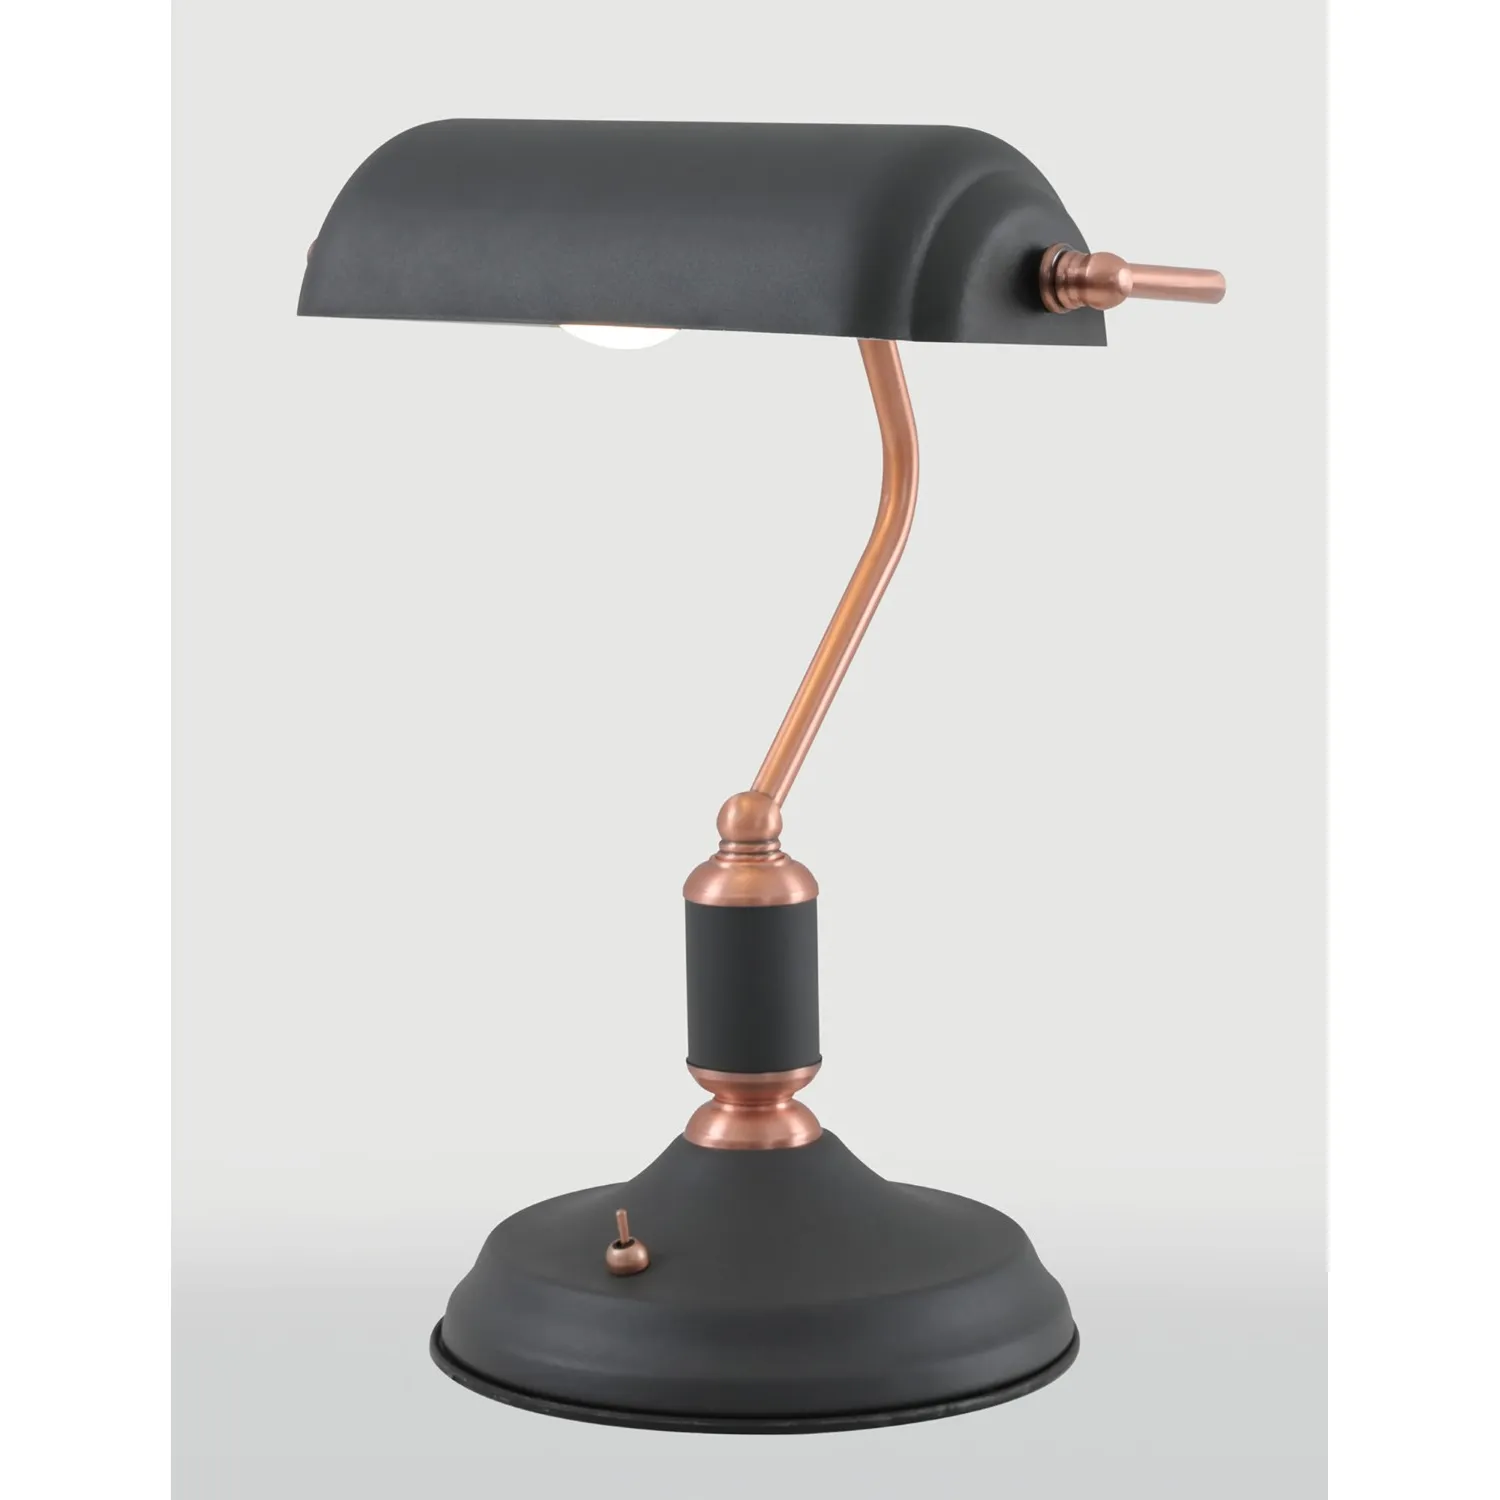 Brent Table Lamp 1 Light With Toggle Switch, Graphite Copper